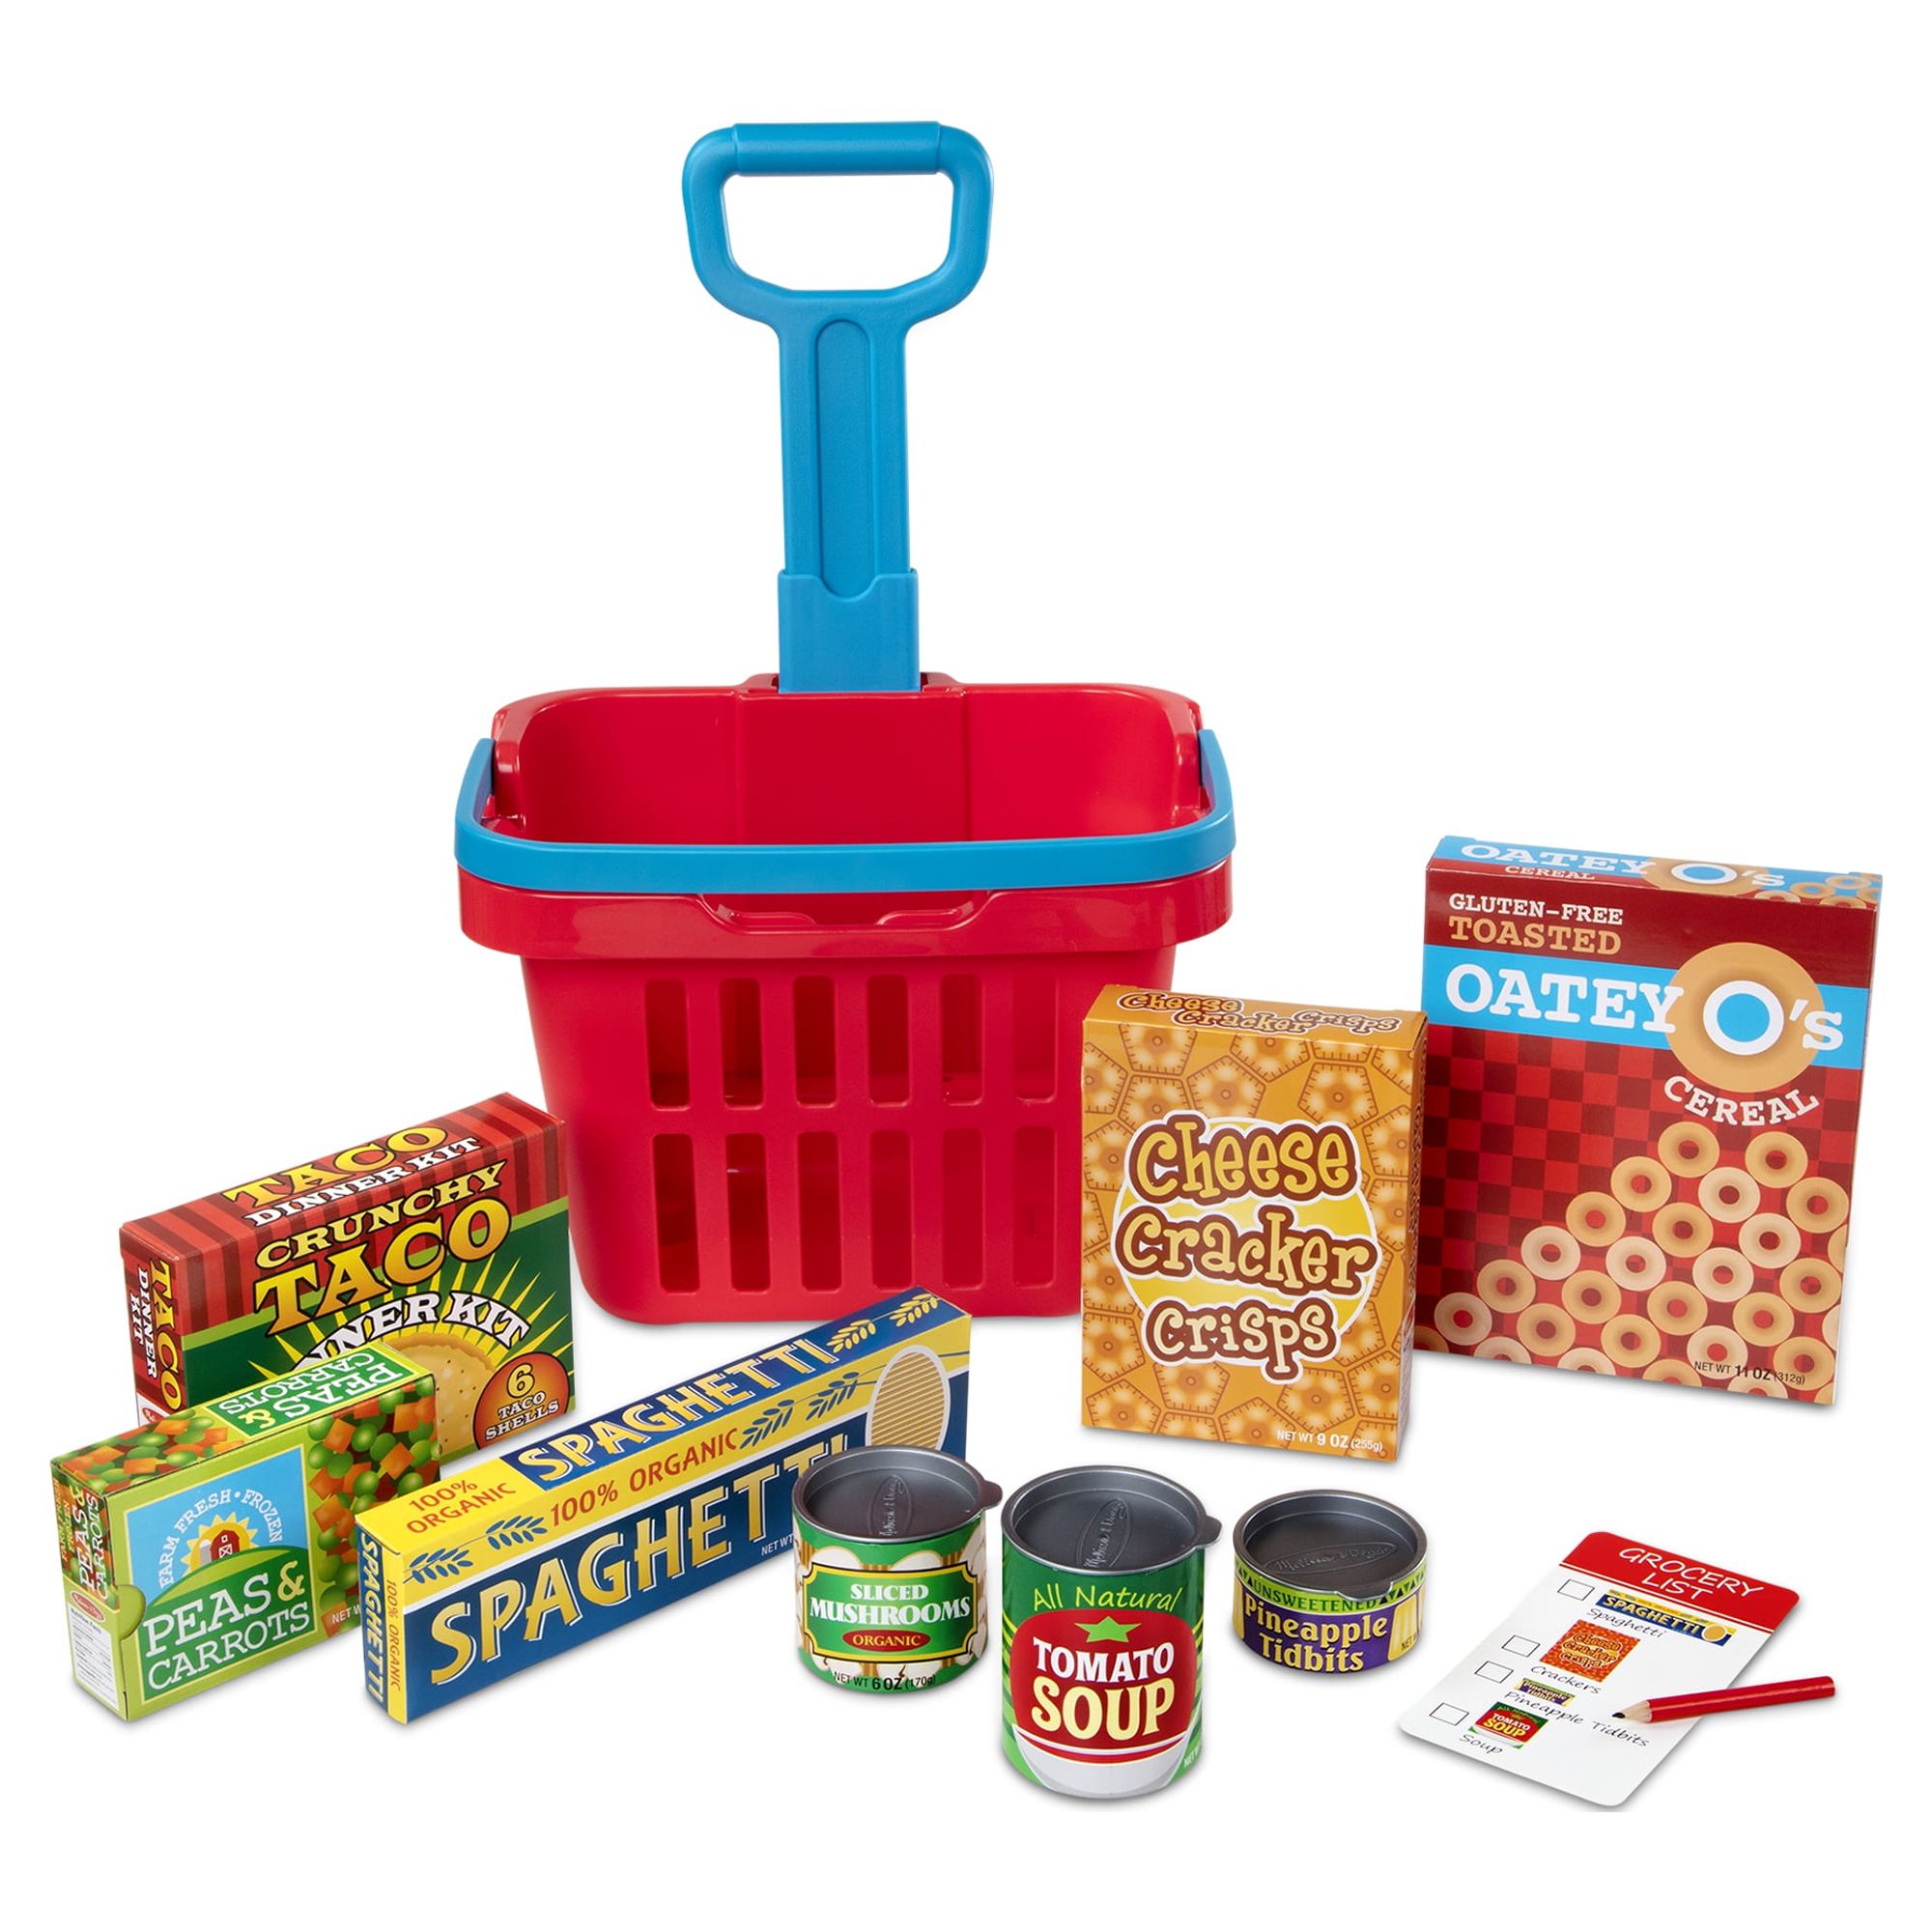 Melissa & Doug Fill and Roll Grocery Basket Play Set With Play Food Boxes and Cans (11 pcs) - image 1 of 10